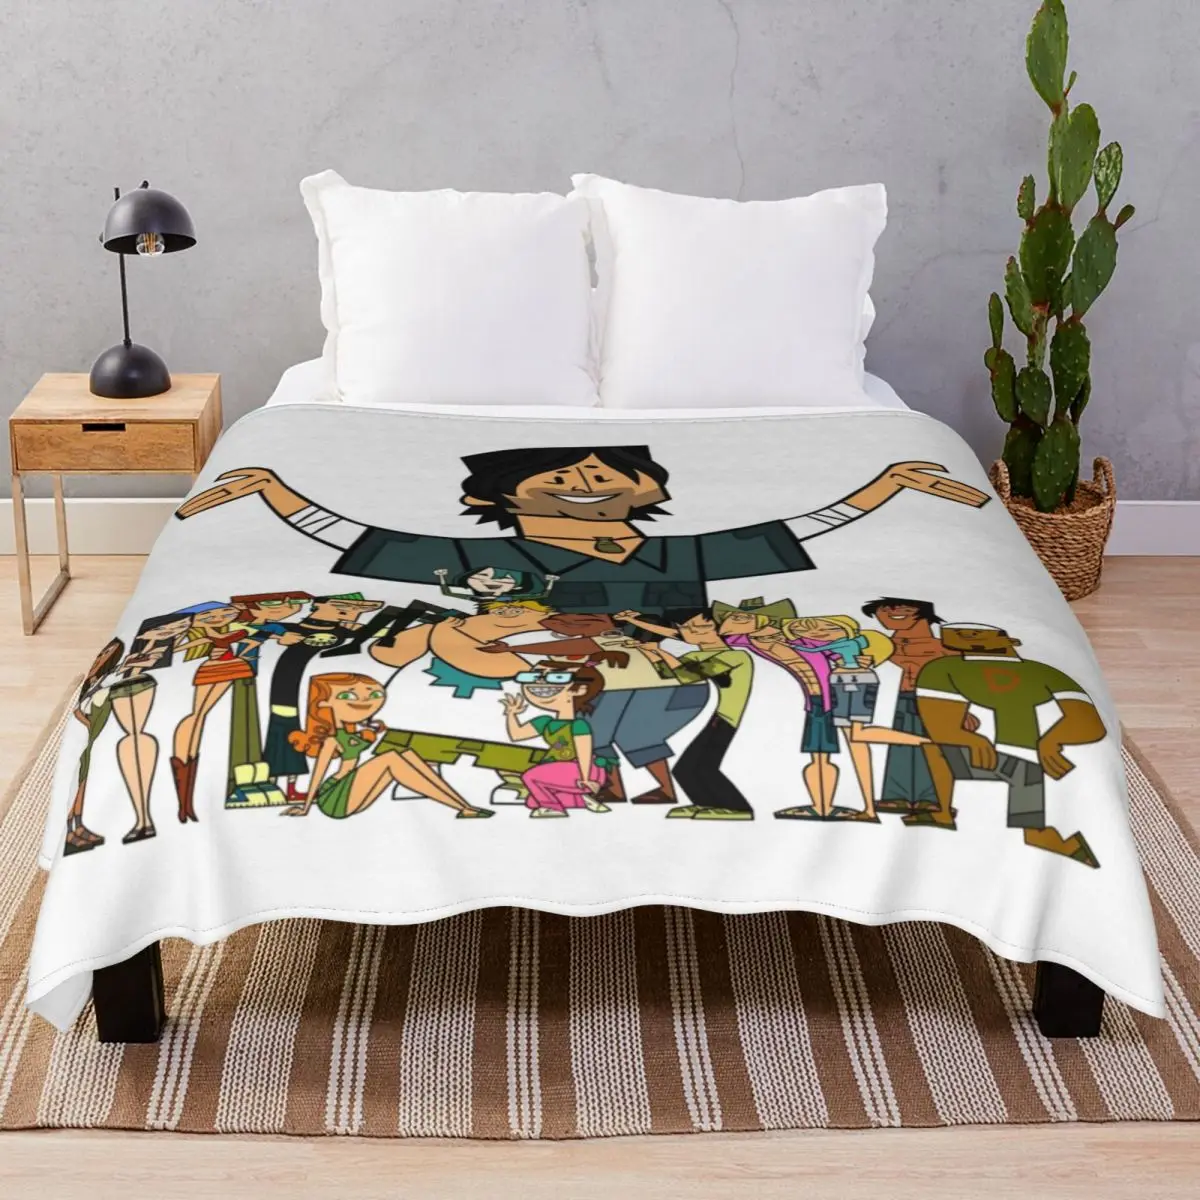 Total Drama Blankets Flannel Spring Autumn Multi-function Unisex Throw Blanket for Bed Home Couch Camp Cinema